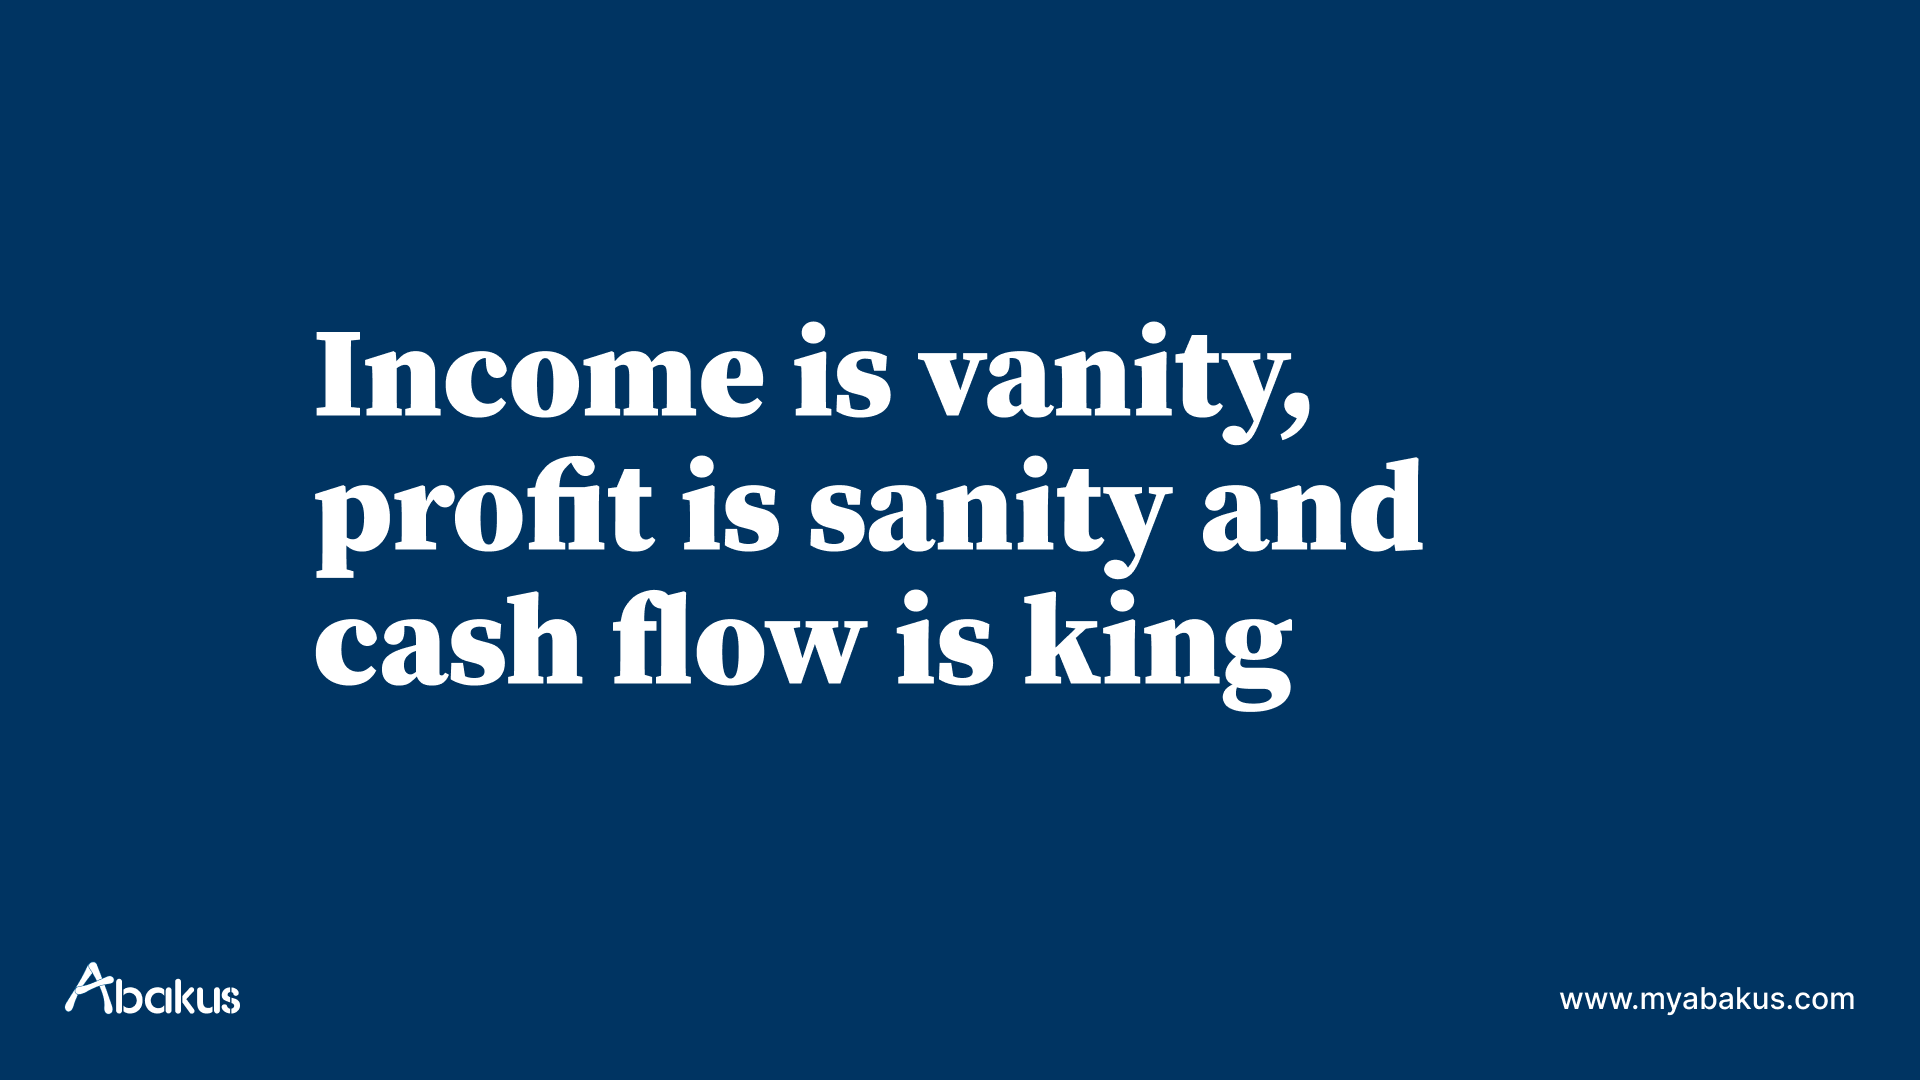 Income is vanity, profit is sanity and cash flow is king